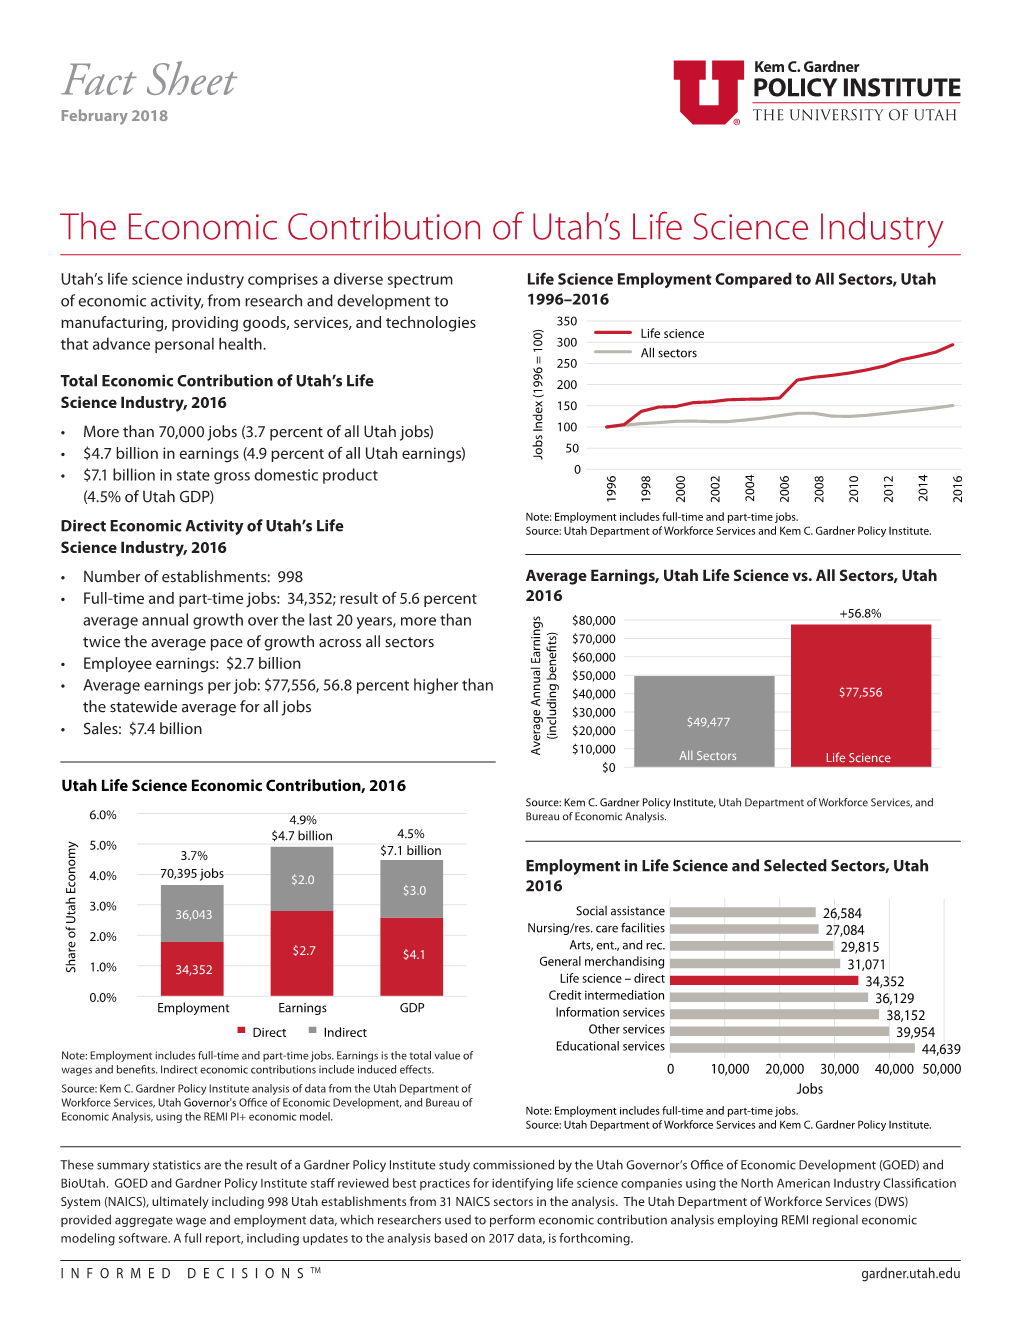 Fact Sheet February 2018 Life Science Employment Compared to All Sectors, Utah 1996–2016